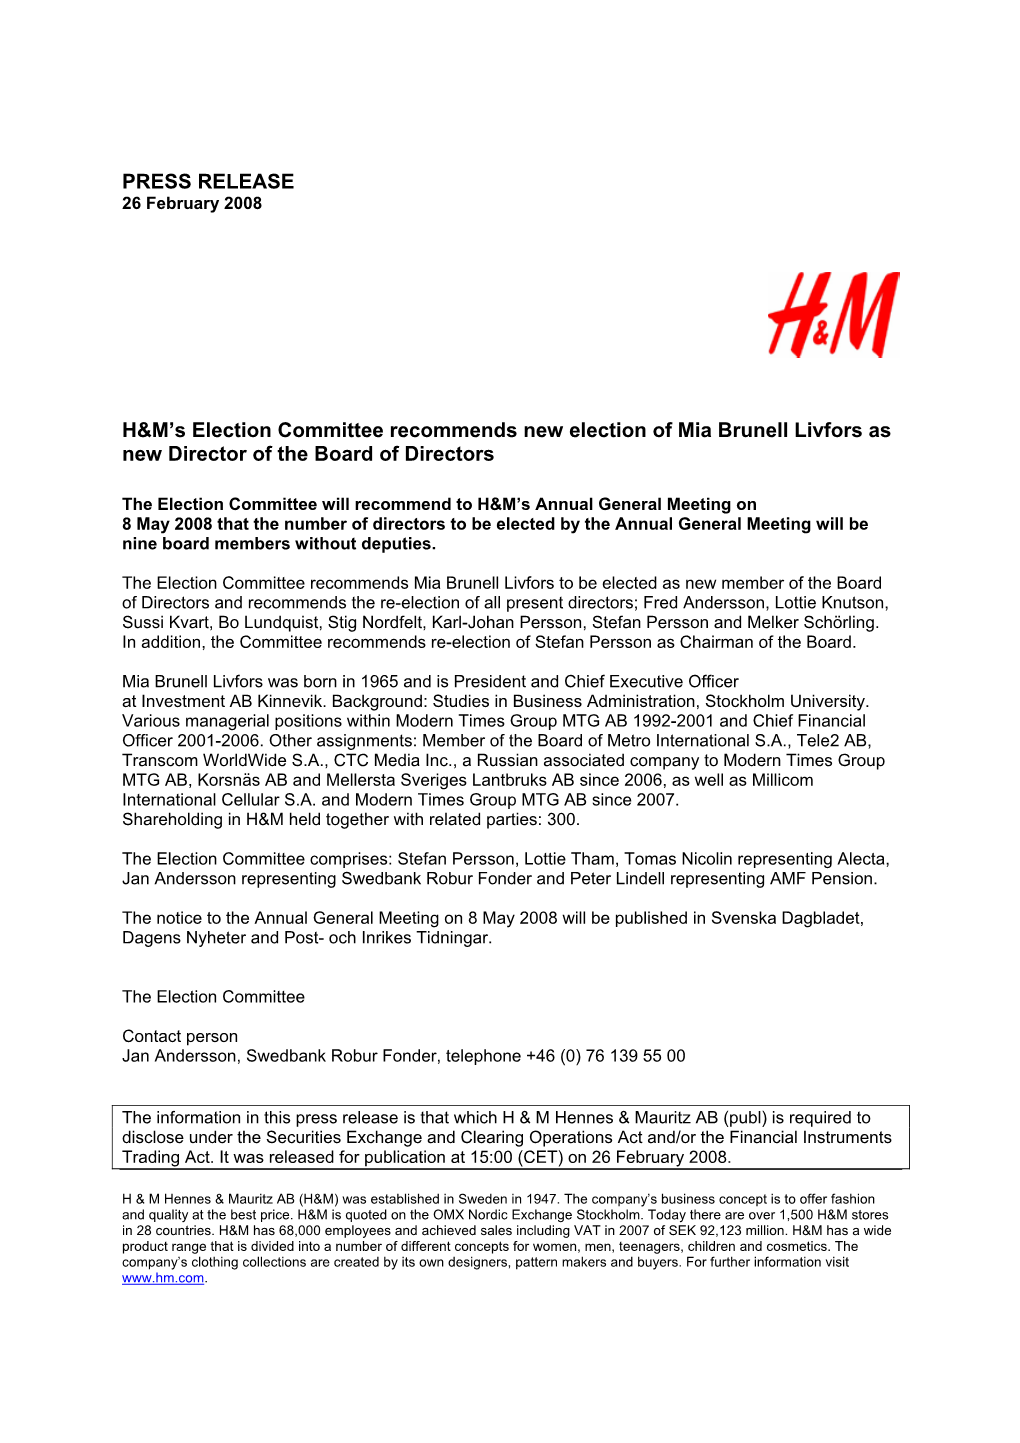 H&M's Election Committee Recommends New Election of Mia